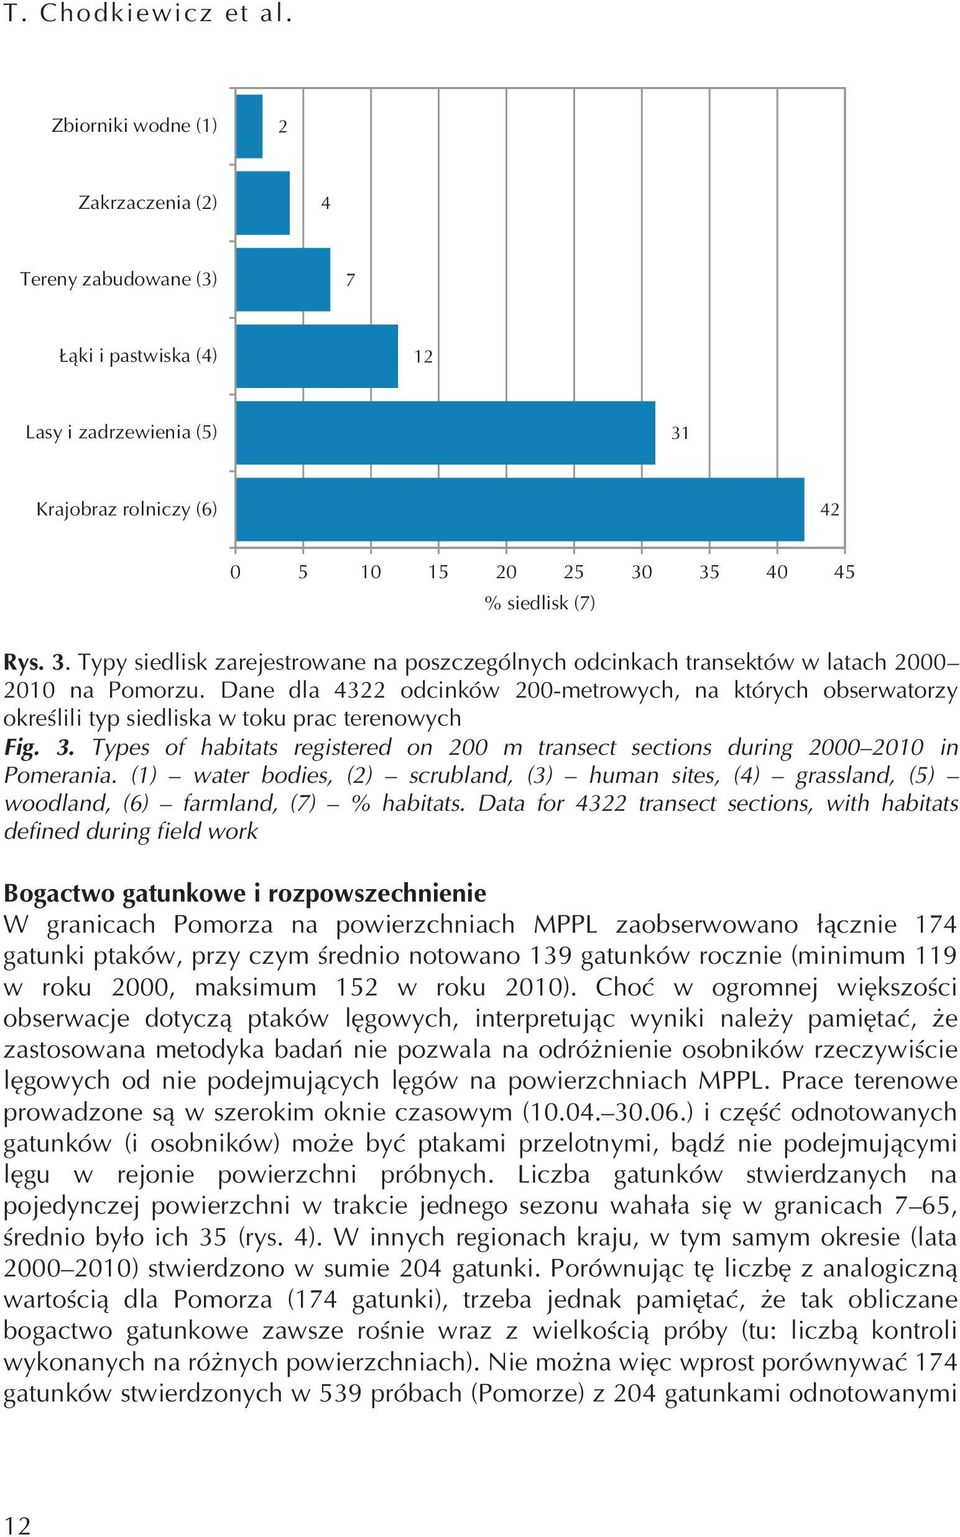 . Types of habitats registered on m transect sections during in Pomerania. () water bodies, () scrubland, () human sites, (4) grassland, (5) woodland, (6) farmland, (7) % habitats.